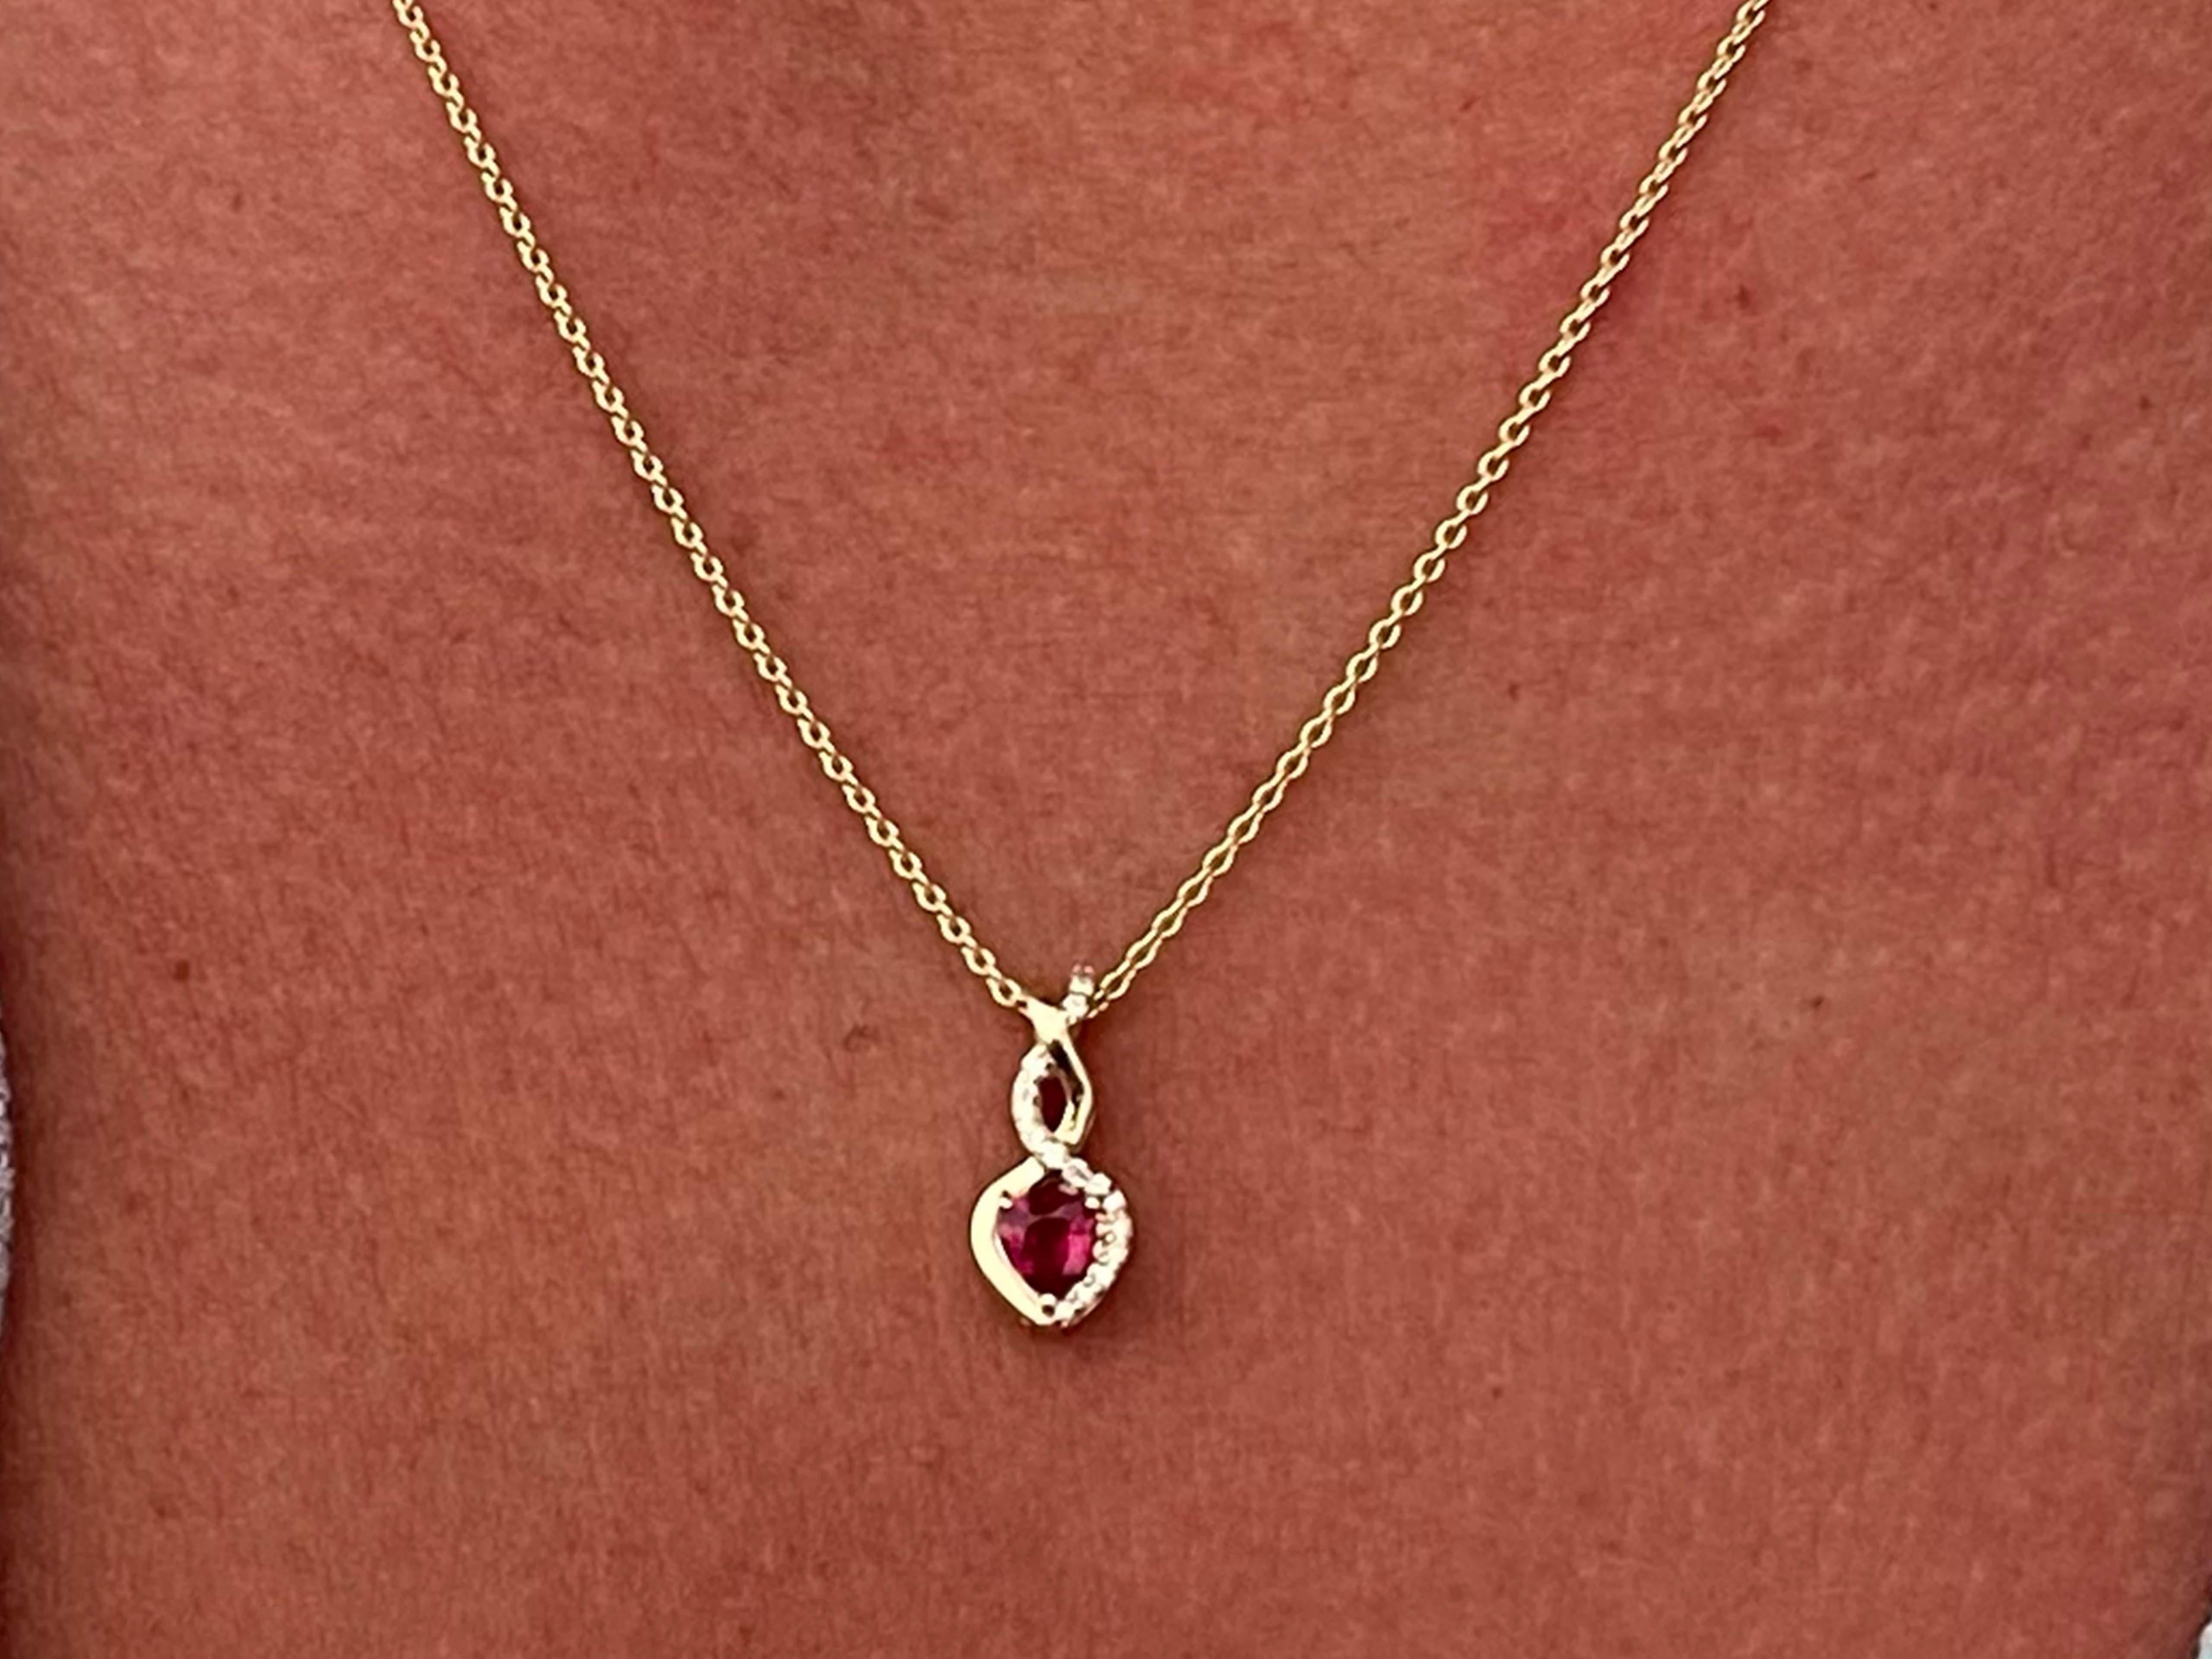 Create a touch of magic wearing this lovely ruby and diamond pendant for women featuring a 0.25 carat heart shaped red ruby set in luxurious 14k yellow gold. The fashionable twist style is accented with 16 round brilliant diamonds. This beautiful